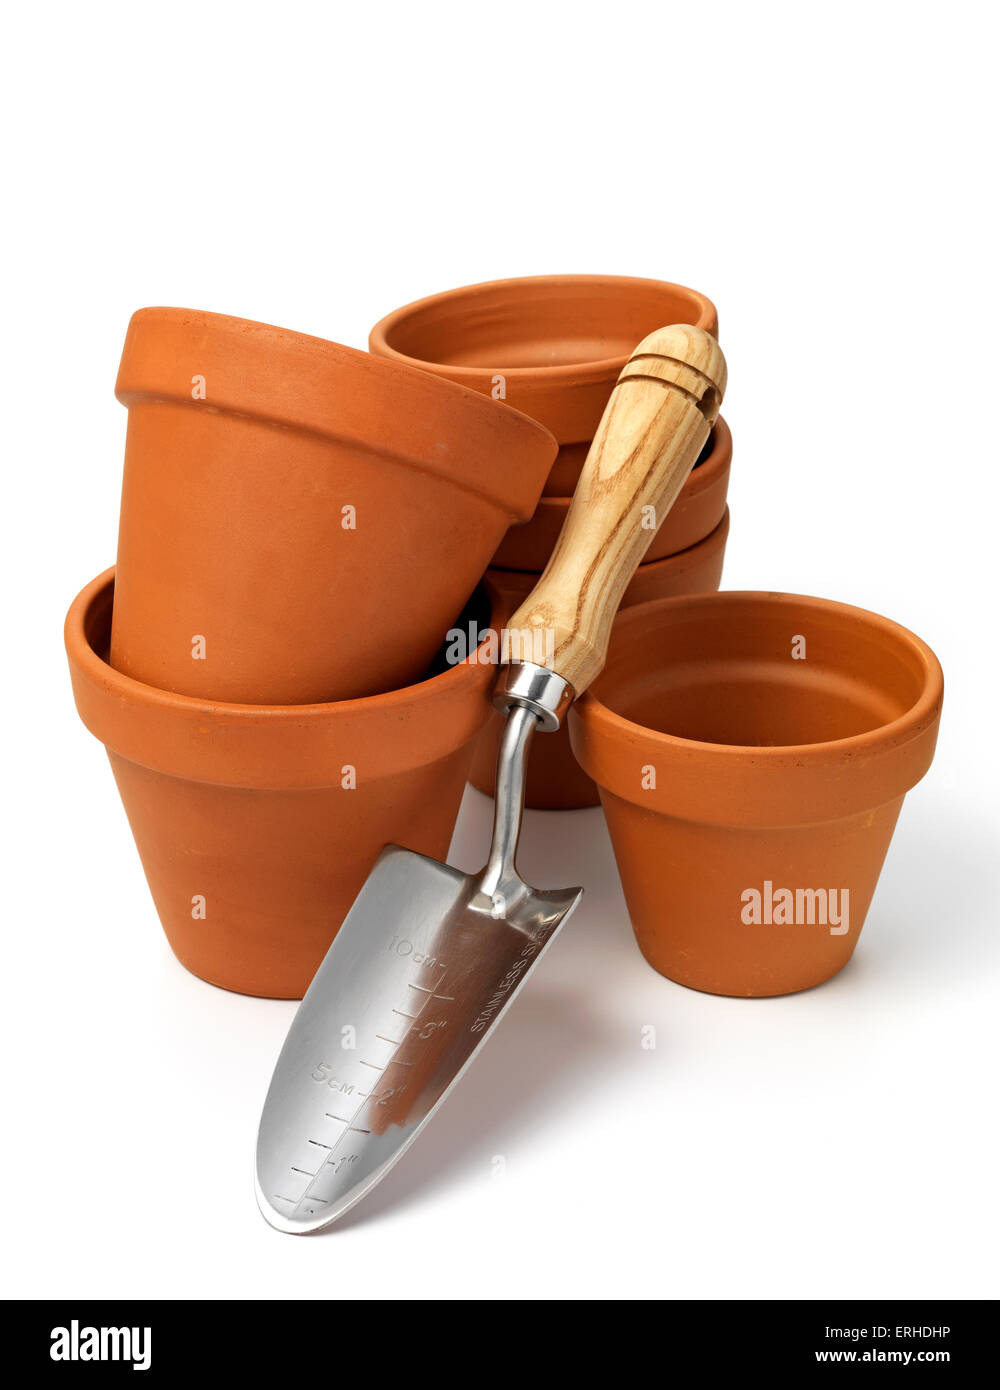 group of gardening pots with a gardening trowel Stock Photo